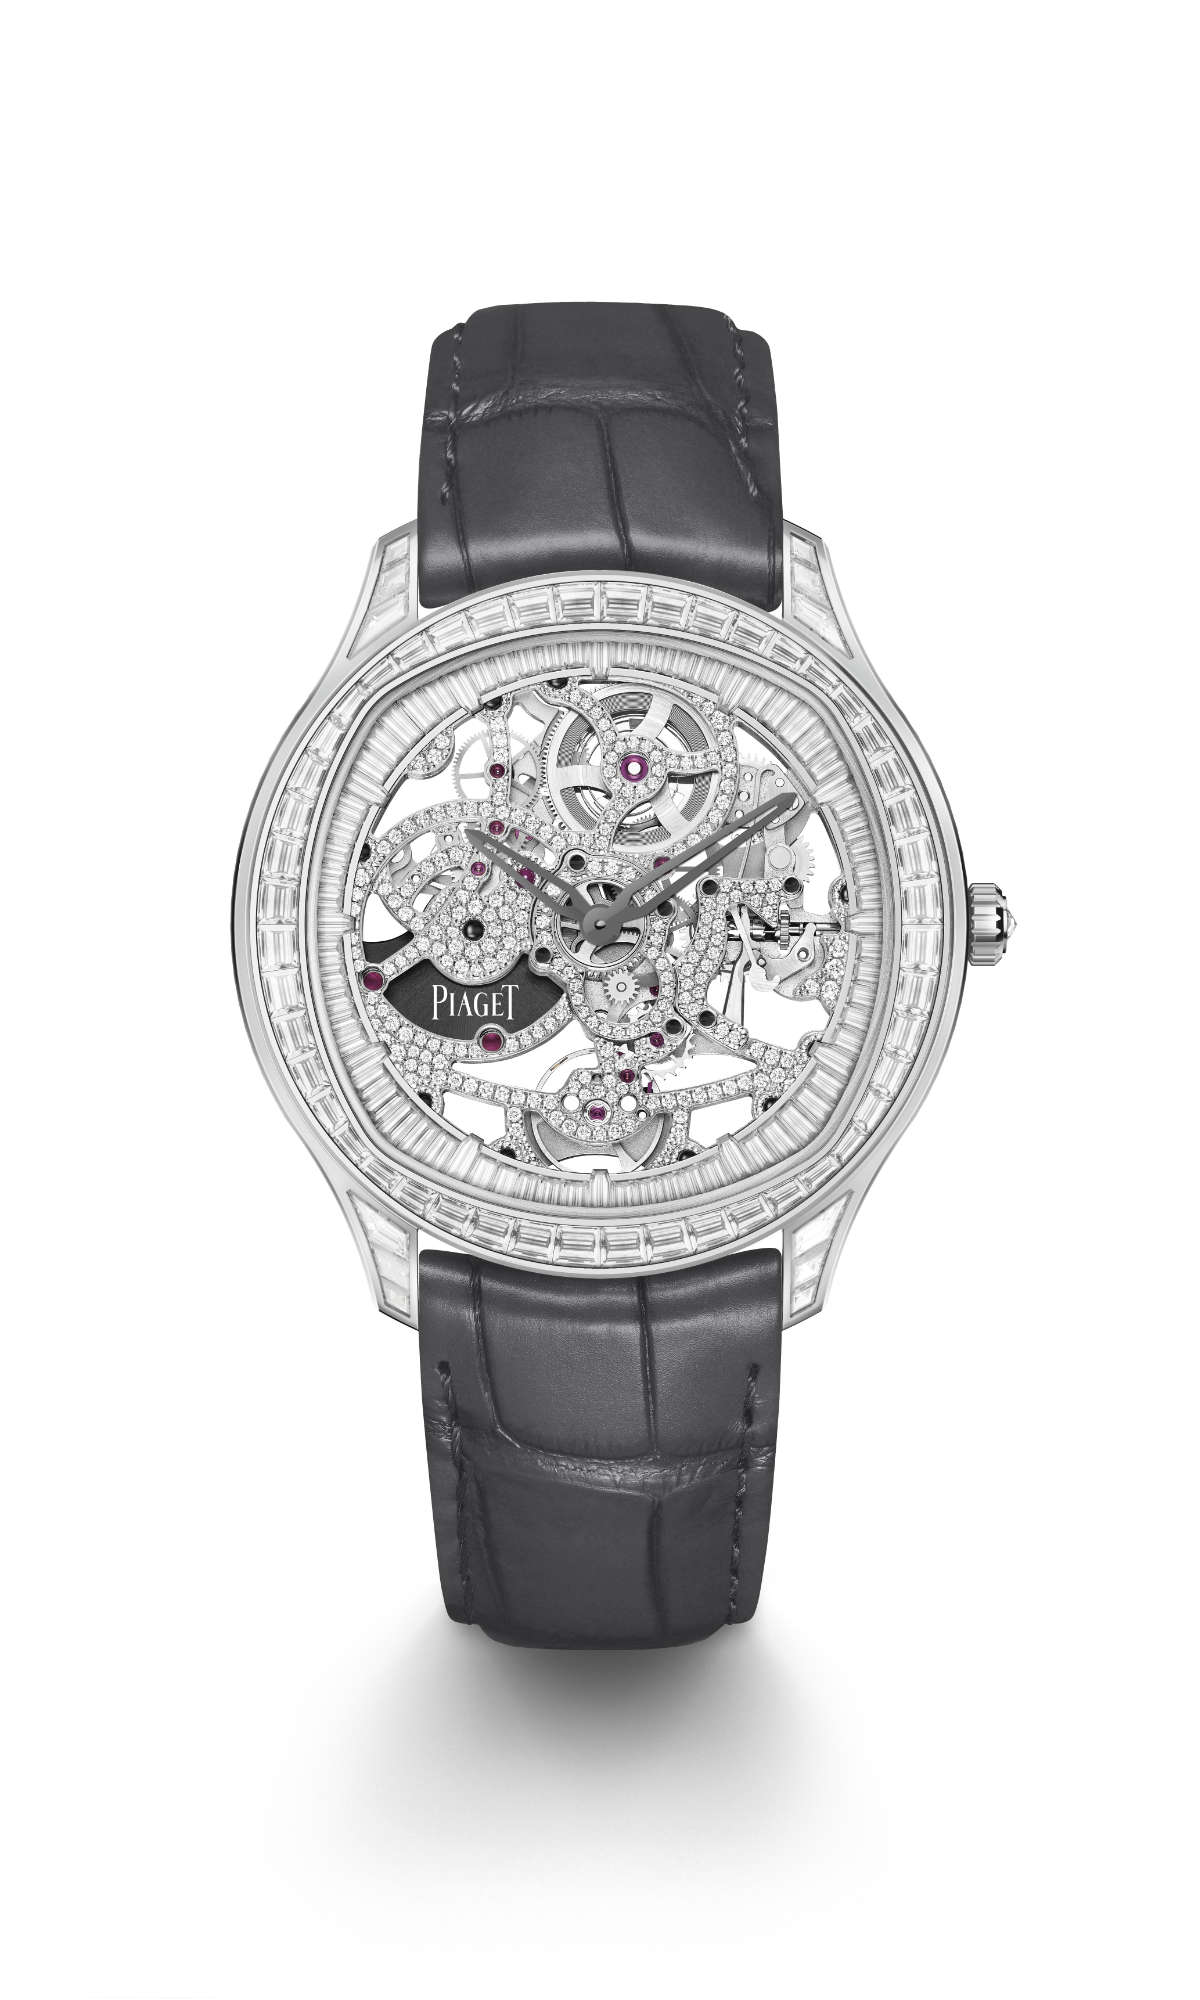 Piaget Makes Lights Up The Stars At The 75th Cannes Festival